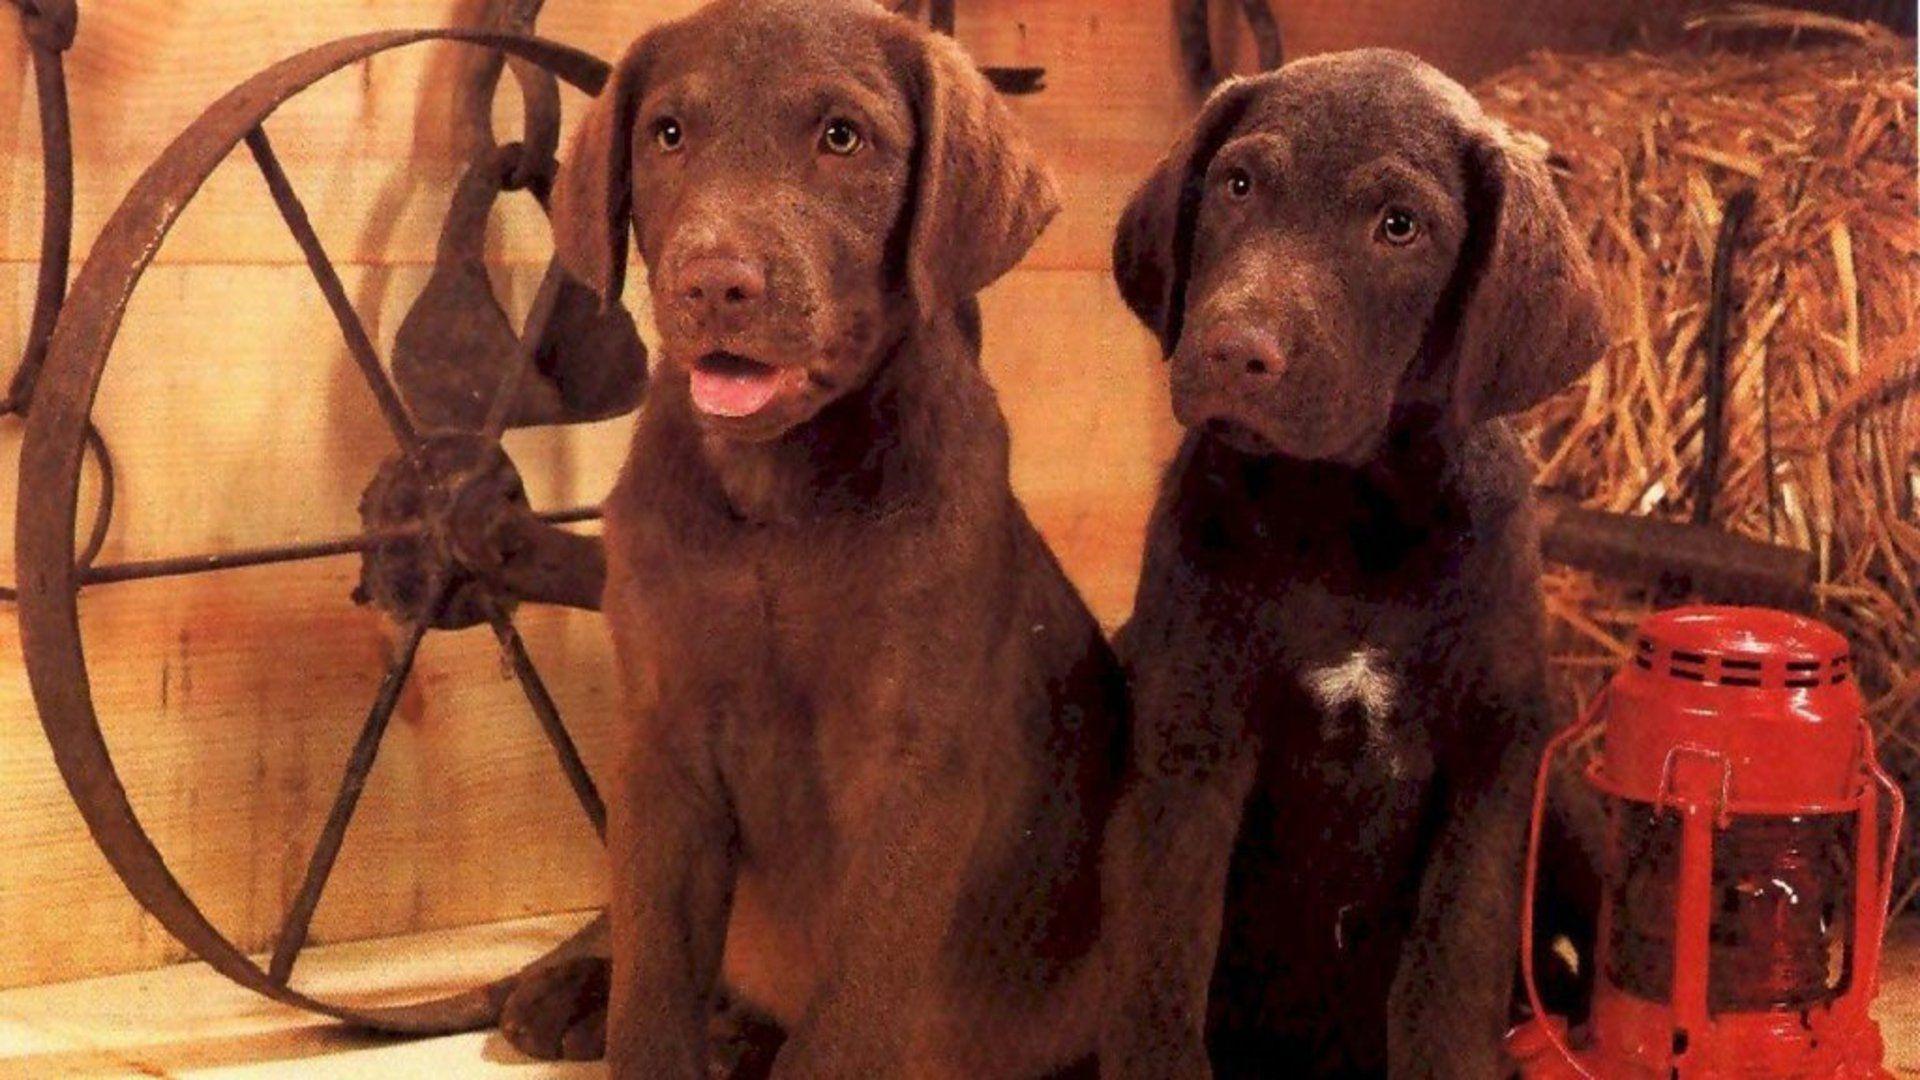 Chocolate labrador puppies wallpaper. Dogs, breeds and everything